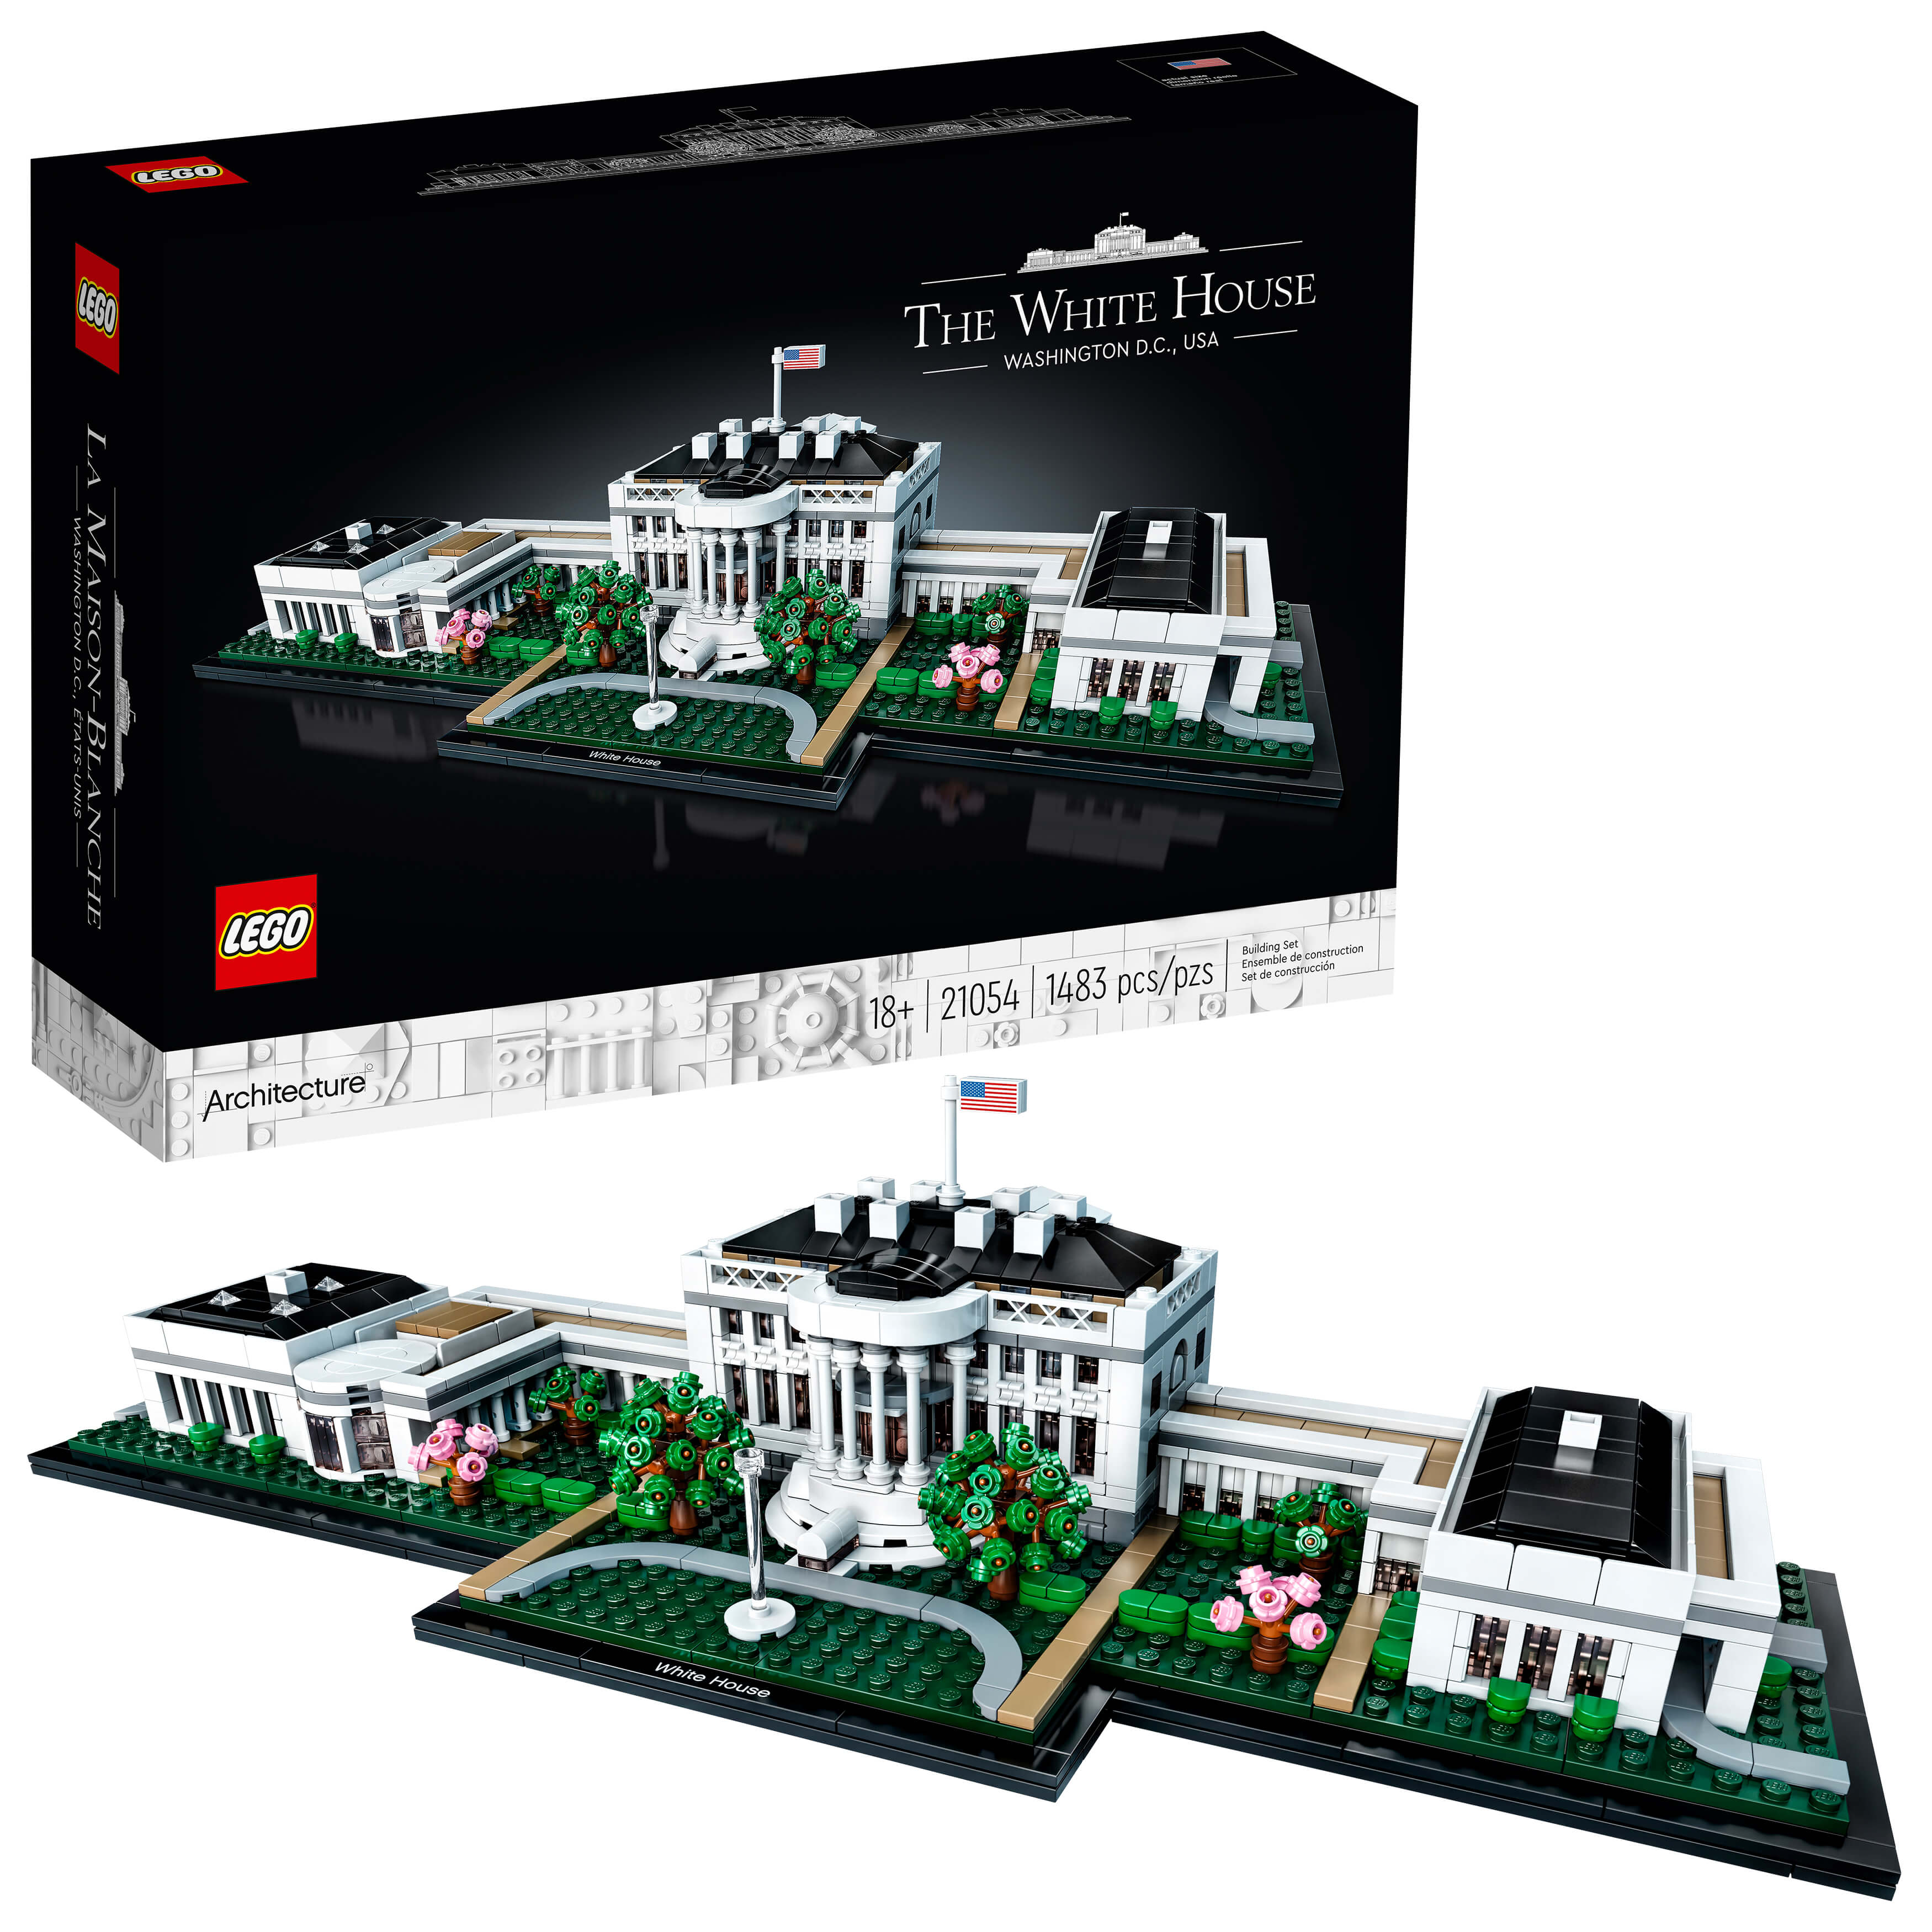 LEGO® Architecture Collection: The White House 21054 Building Kit (1,483 Pieces)